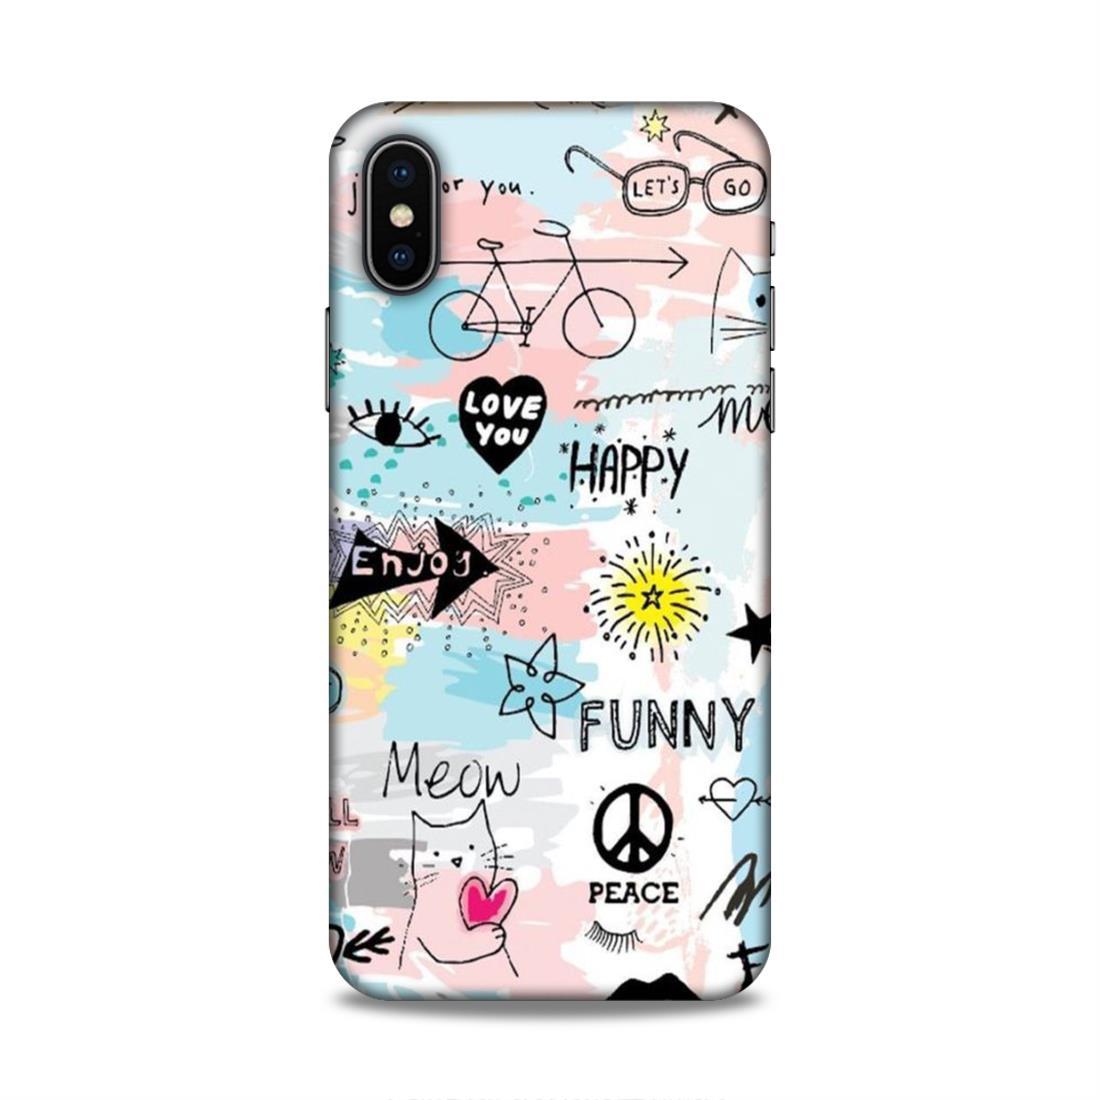 Cute Funky Happy iPhone X Mobile Cover Case